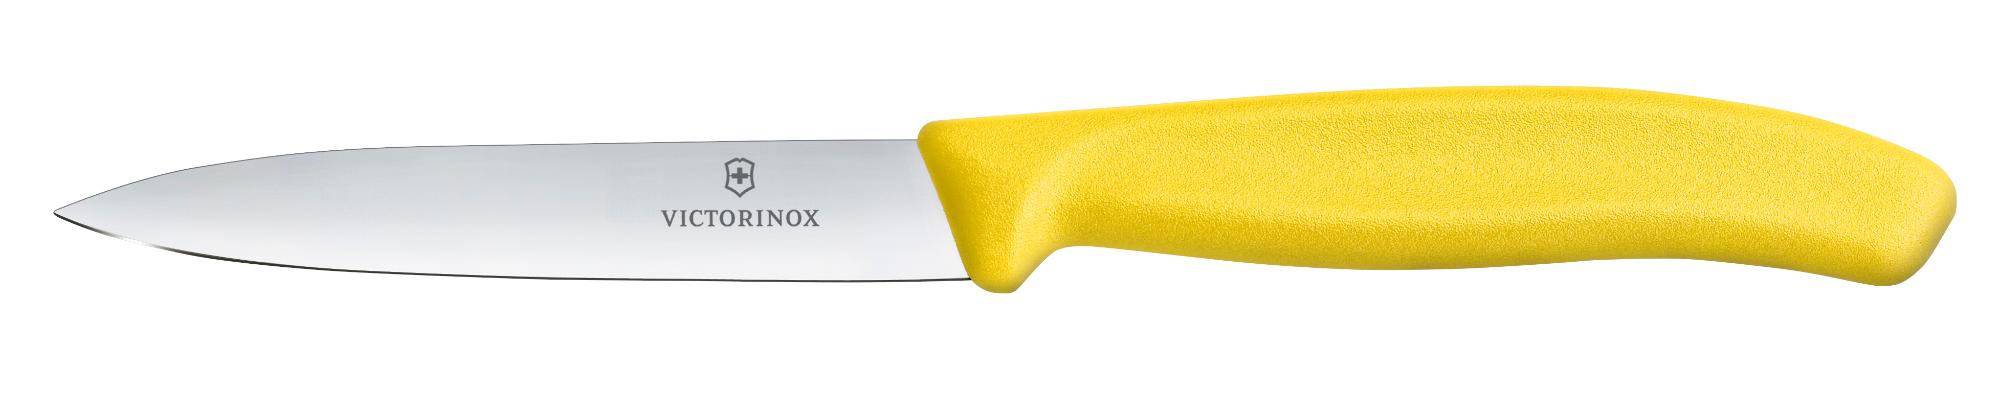 Swiss Classic vegetable knife, smooth, 10 cm - yellow